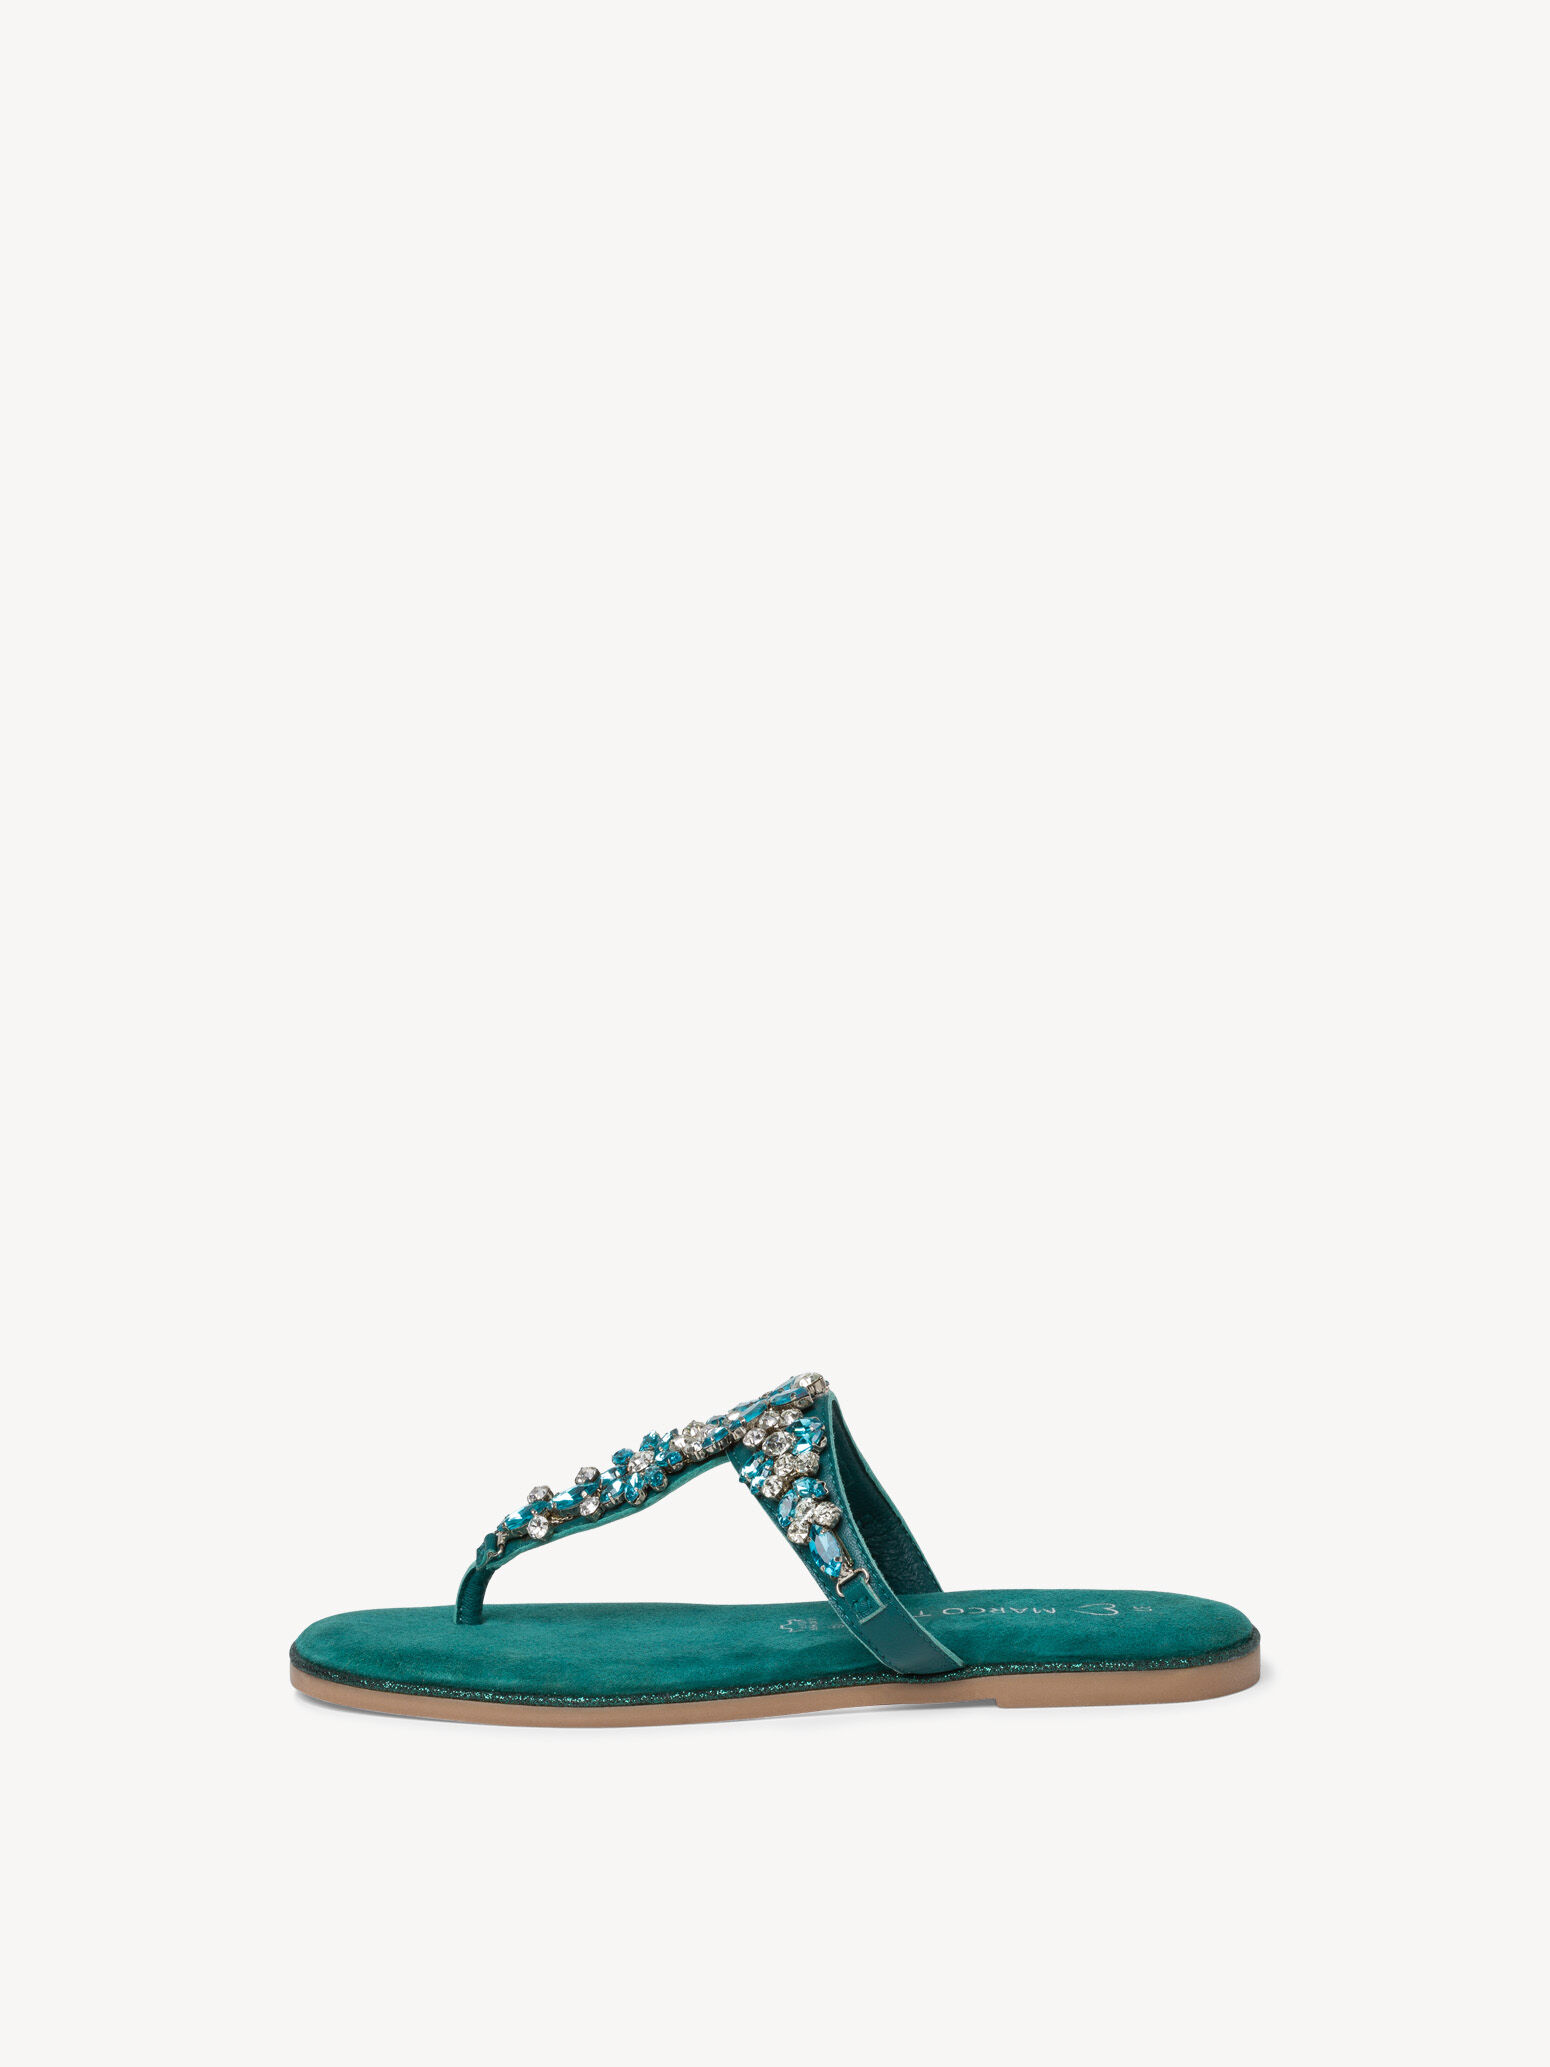 Mule 2-2-27107-20: Buy Toe post sandals from Marco Tozzi online!